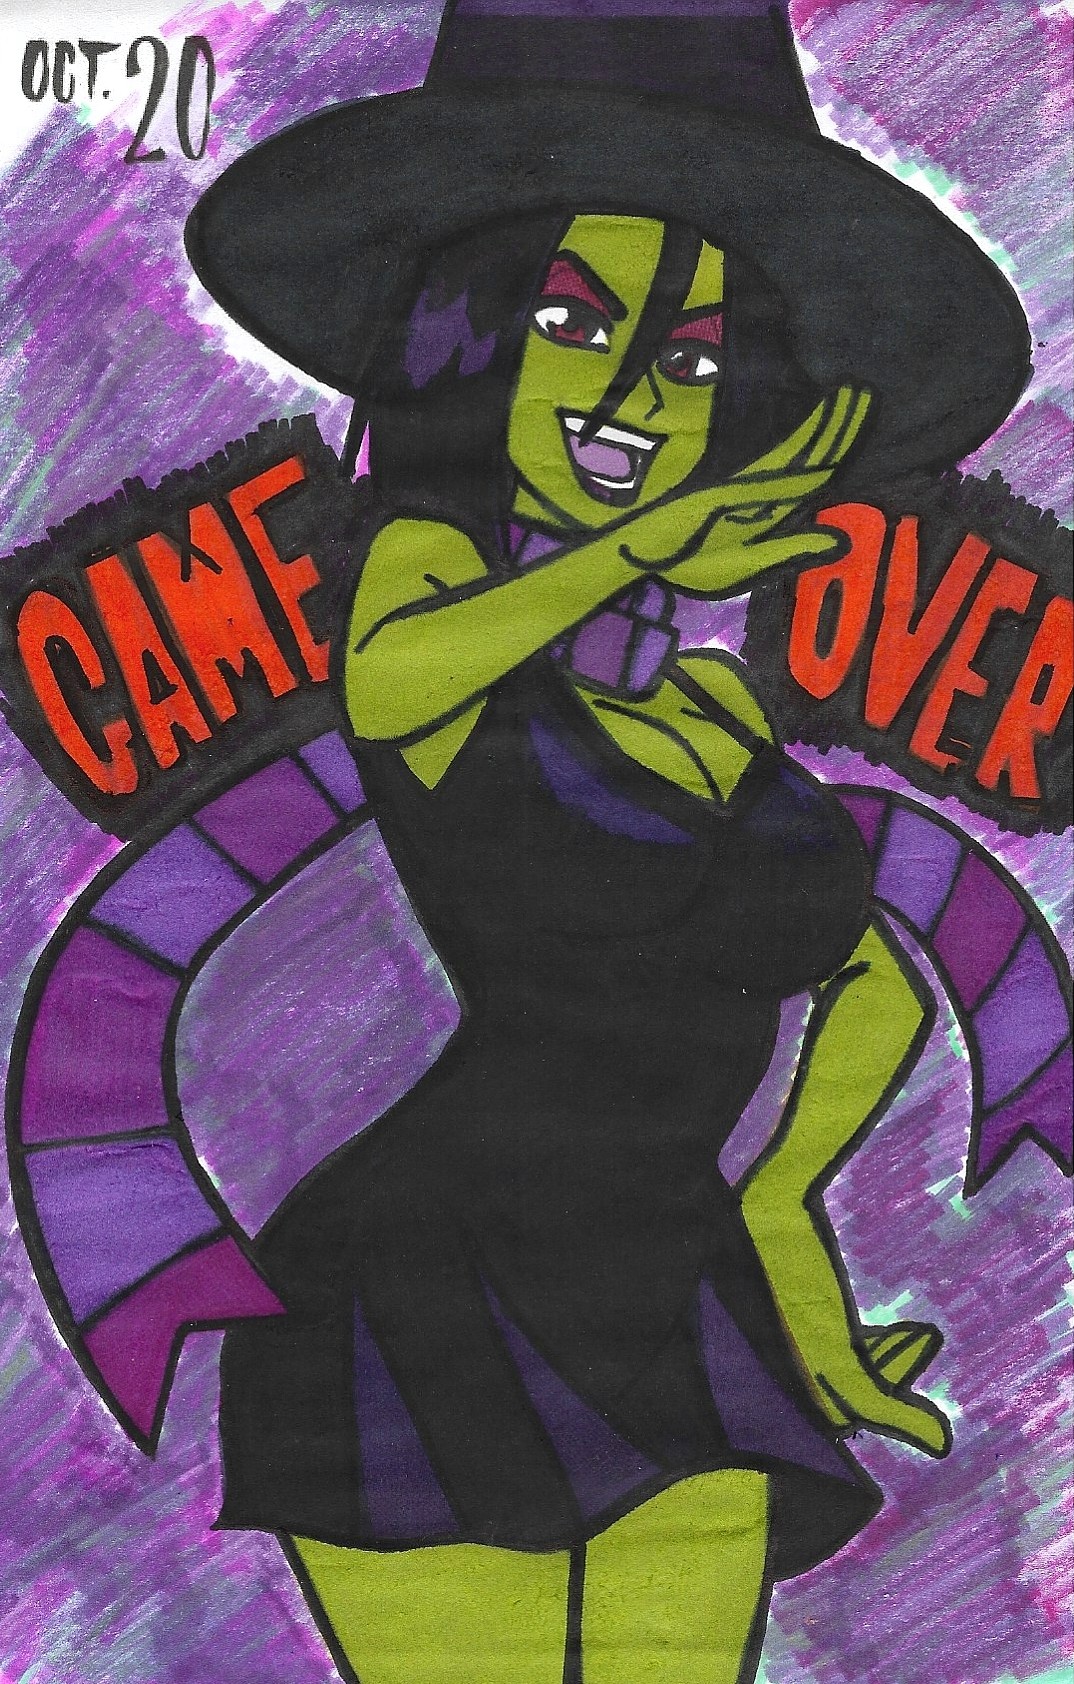 Game Over (GIF) by jkaa0518 on DeviantArt